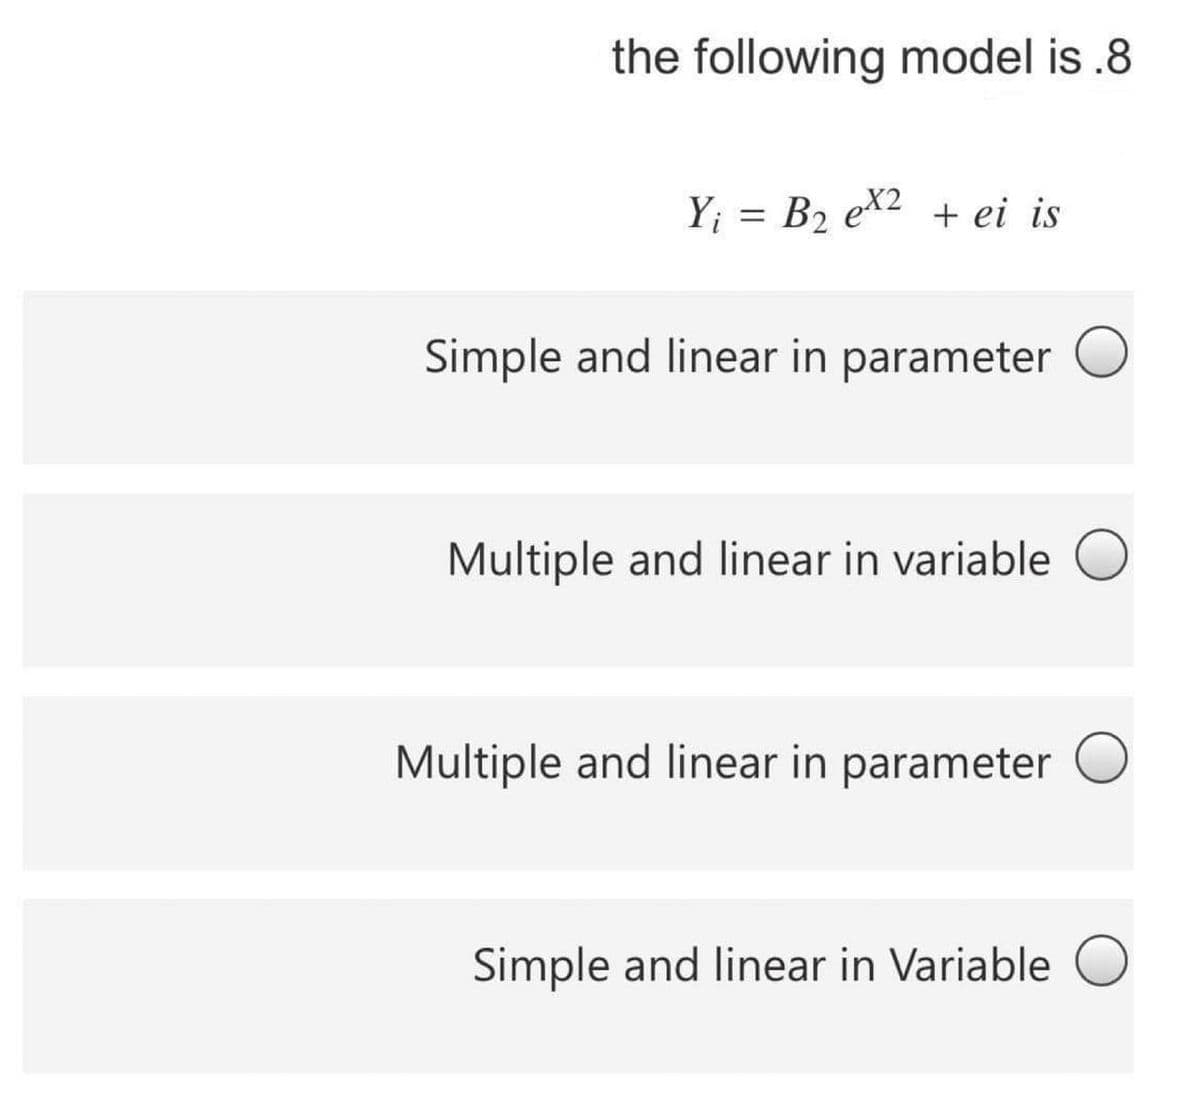 the following model is .8
Y; = B2 ex2 + ei is
Simple and linear in parameter O
Multiple and linear in variable O
Multiple and linear in parameter O
Simple and linear in Variable O
